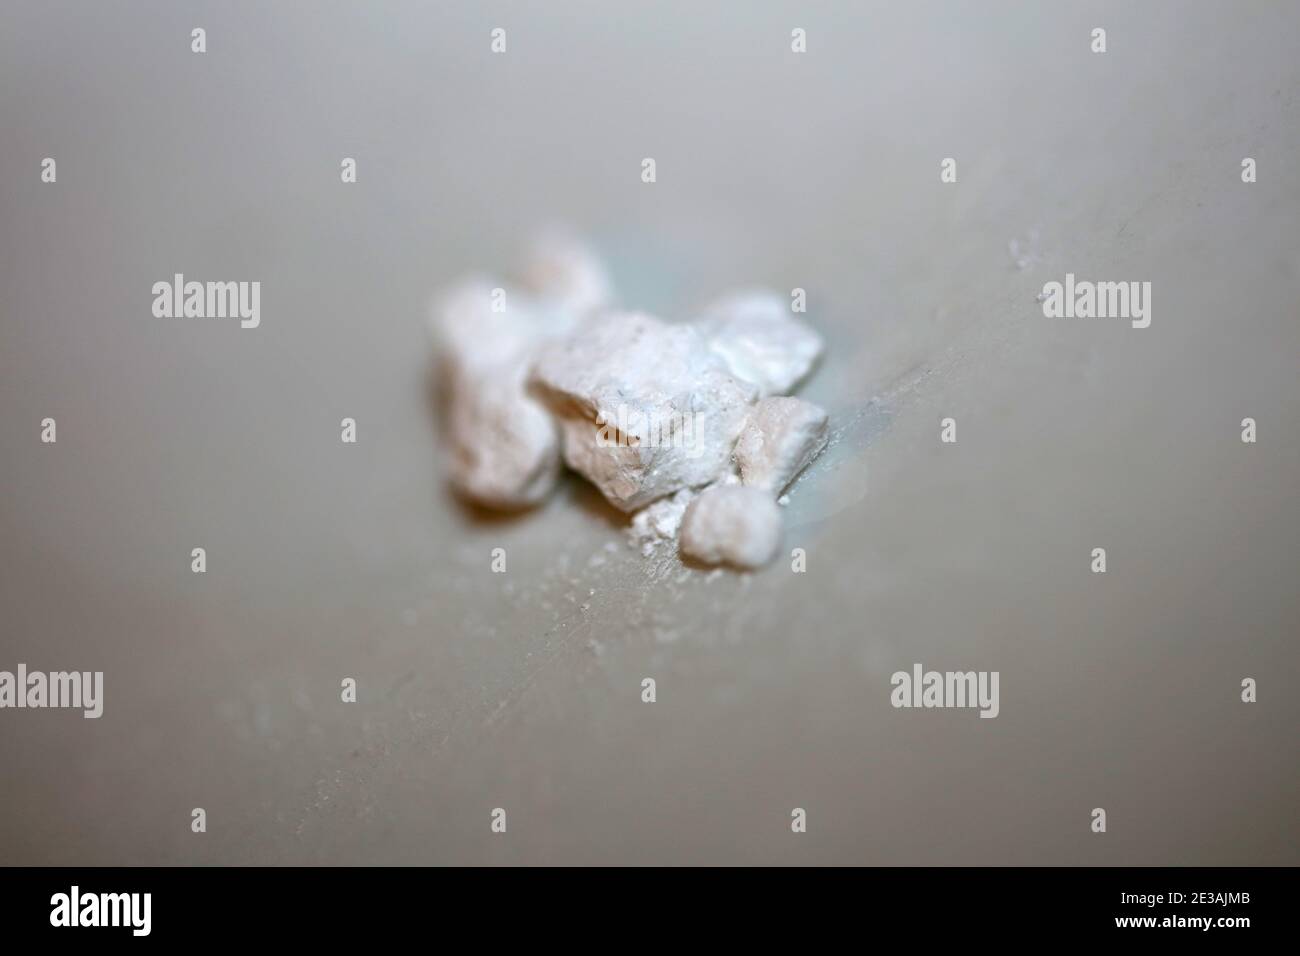 Rocks of cocaine drug in white background close up modern high quality print Stock Photo